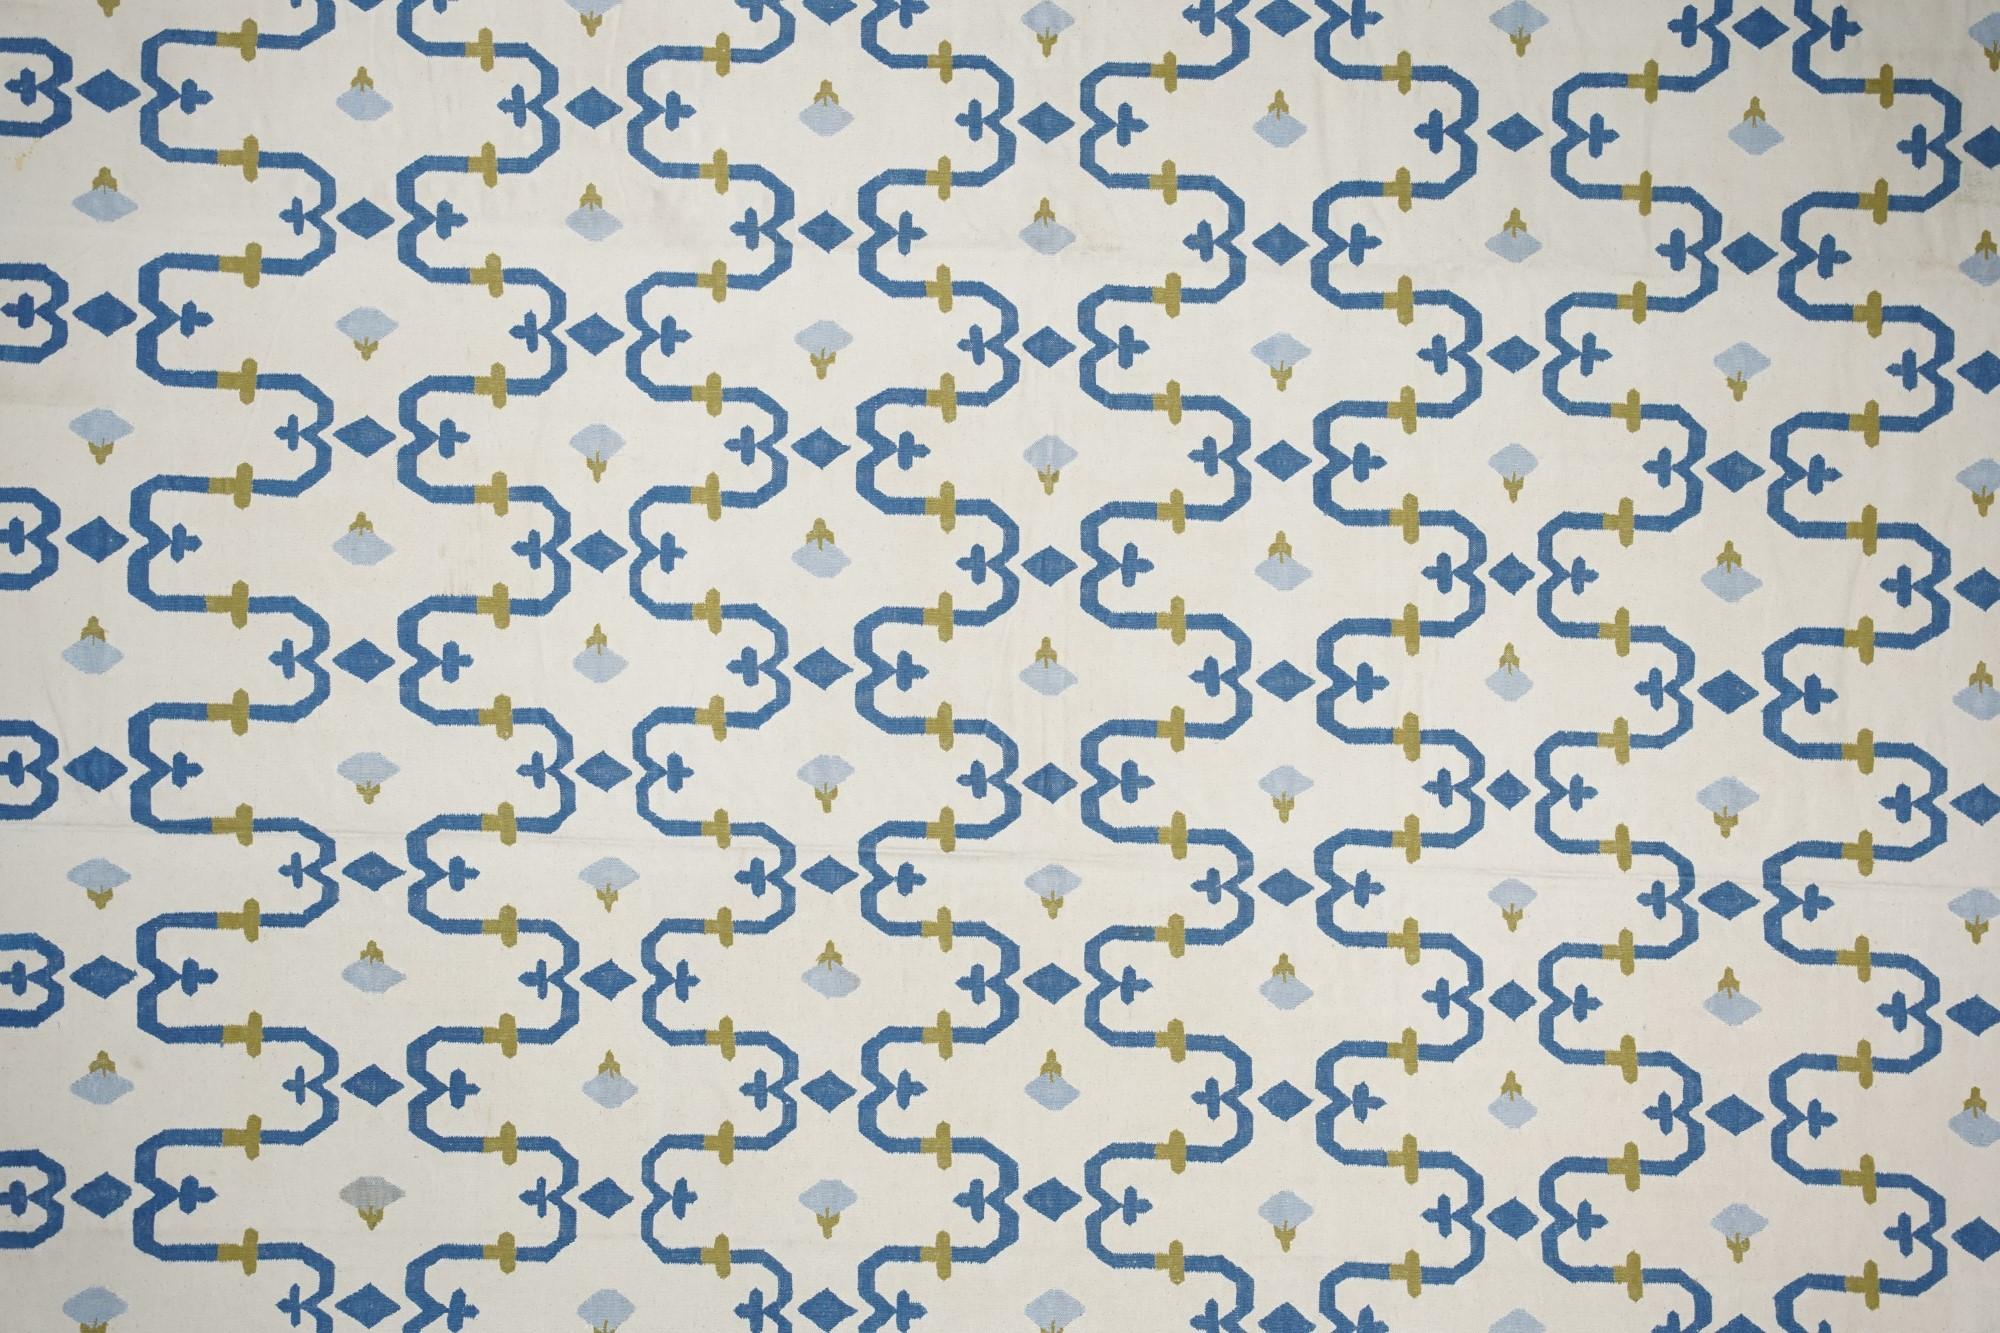 This 10x14 rug is a rare vintage Dhurrie rug from an exciting new mid-century curation by Rug & Kilim. Handwoven in a wool flatweave, it originates from India circa 1950-1960, and enjoys blue and gold geometric patterns.

On the Design: 

Admirers